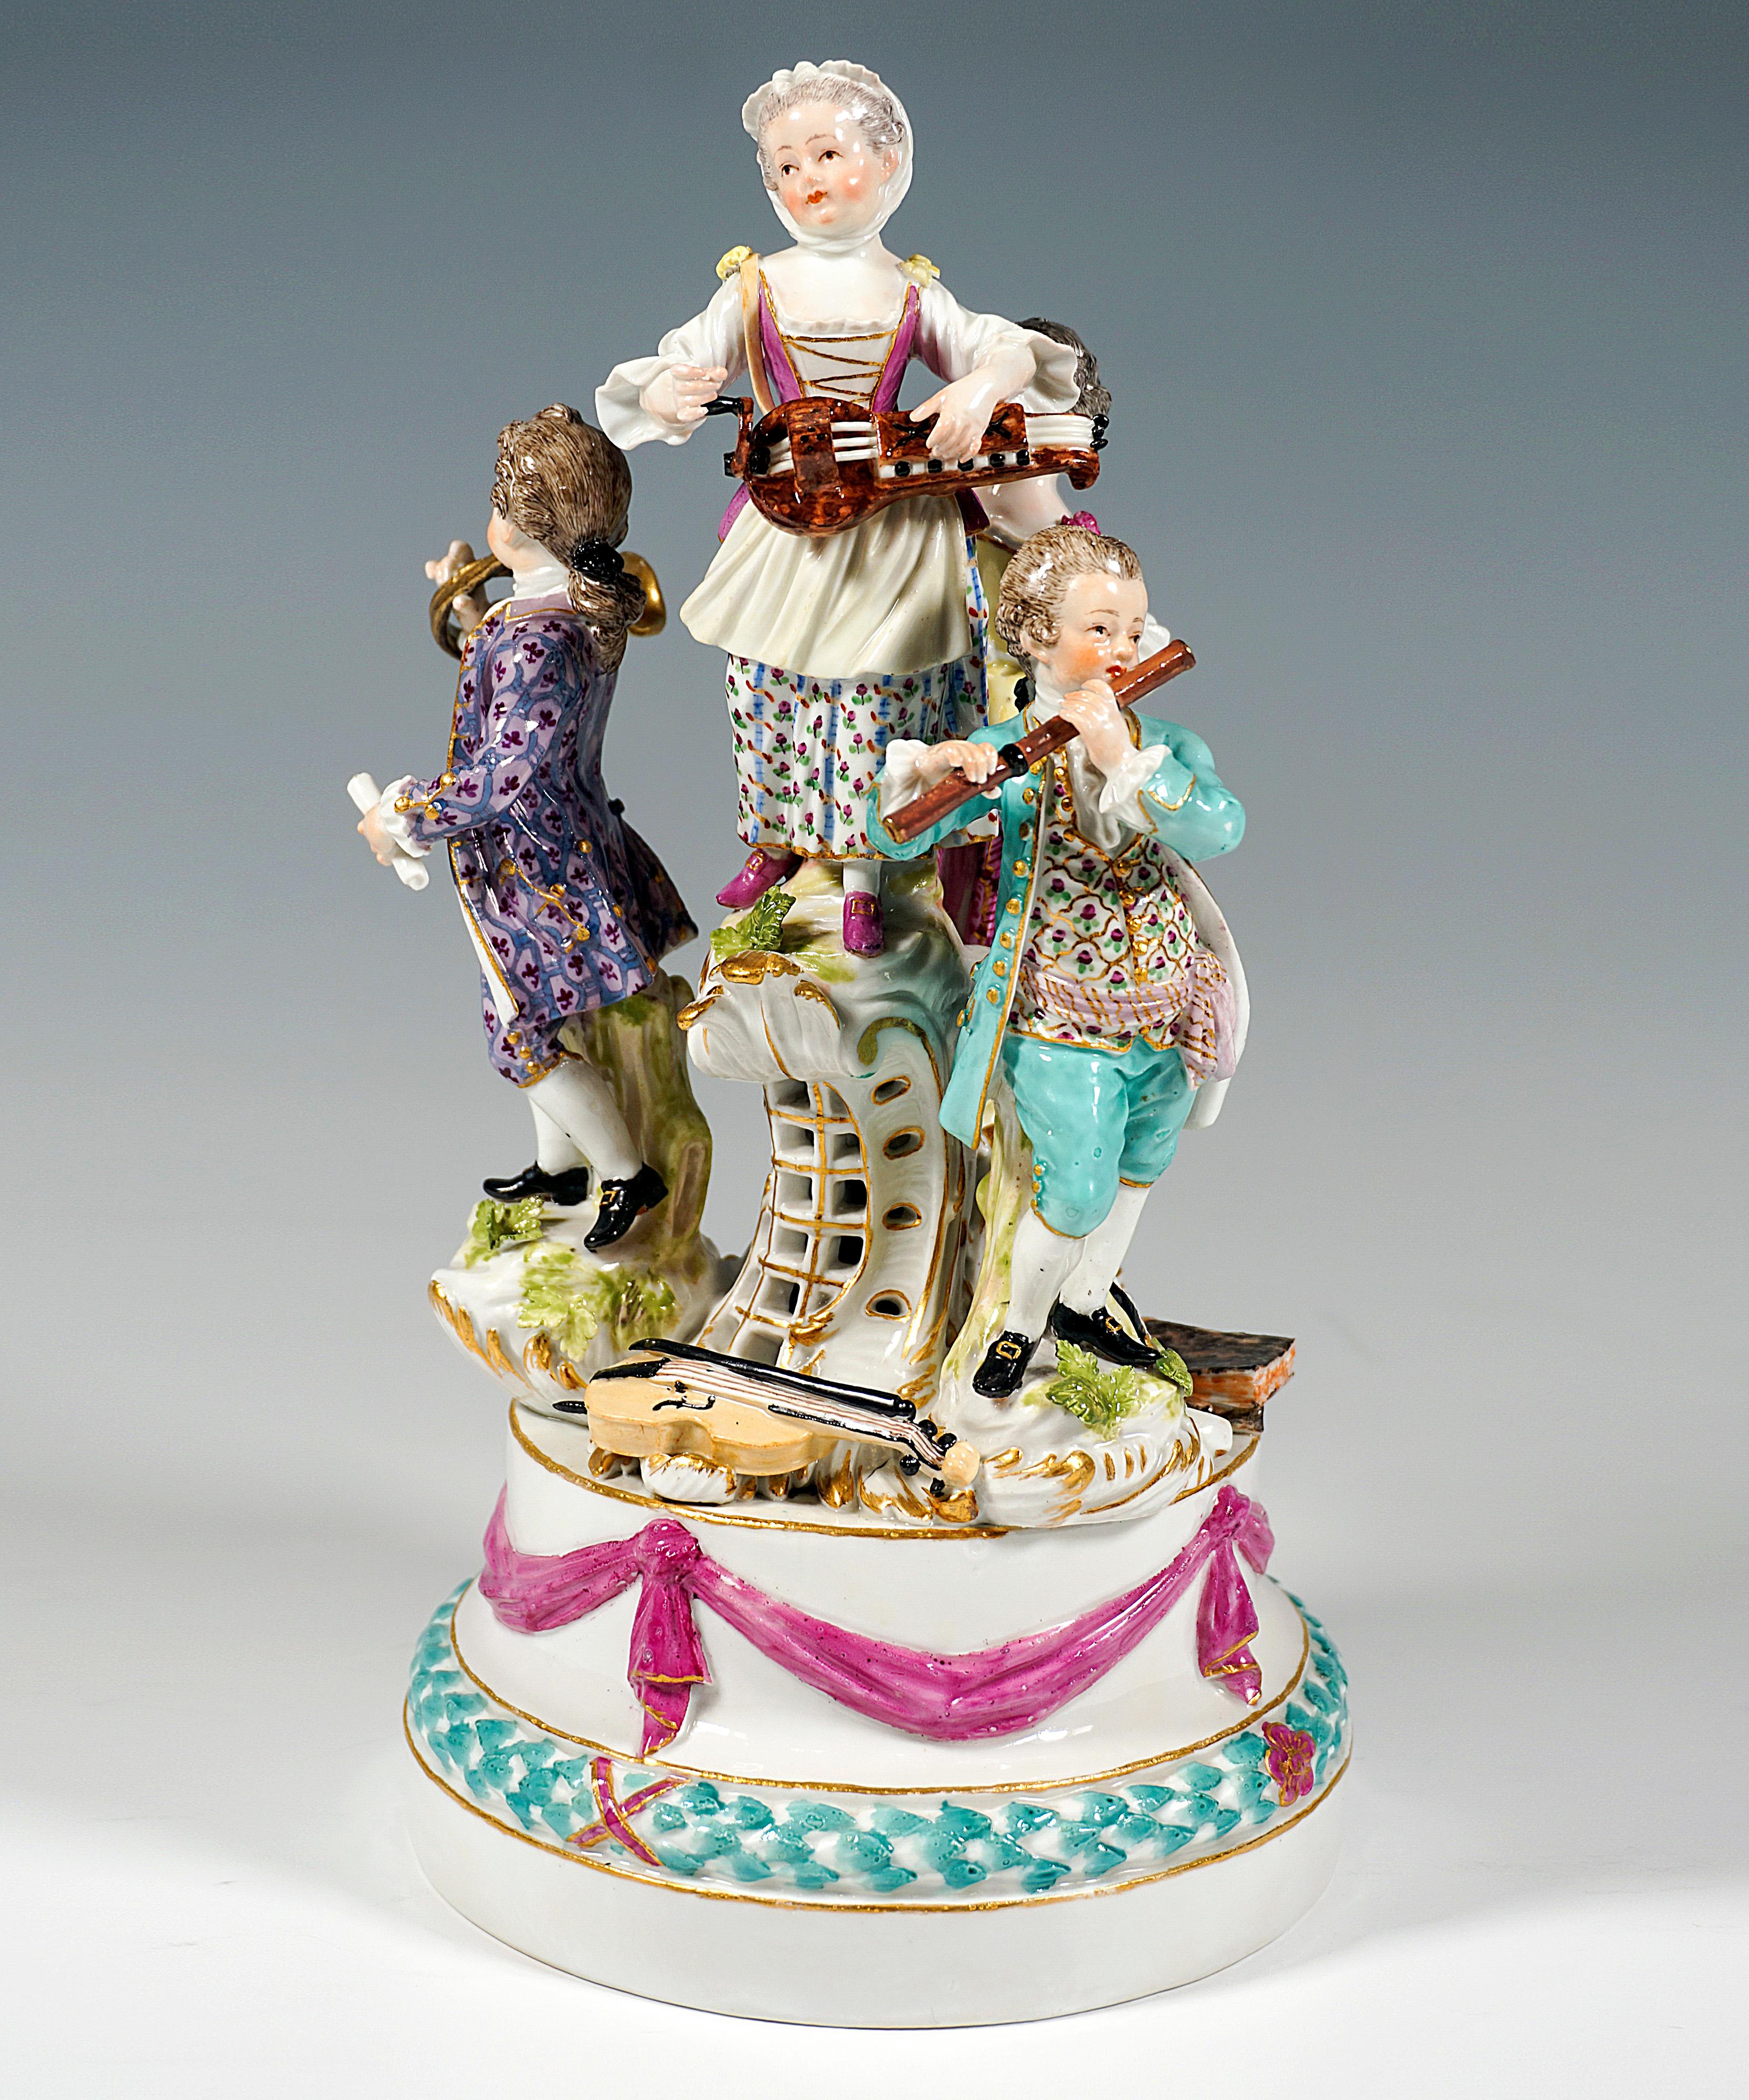 Excellent Meissen piece from the time the model was created:
Four children in festive rural rococo clothing on a high, tiered round base, decorated with a leaf wreath and ribbon festoon with gold decoration, on the base further pedestals of